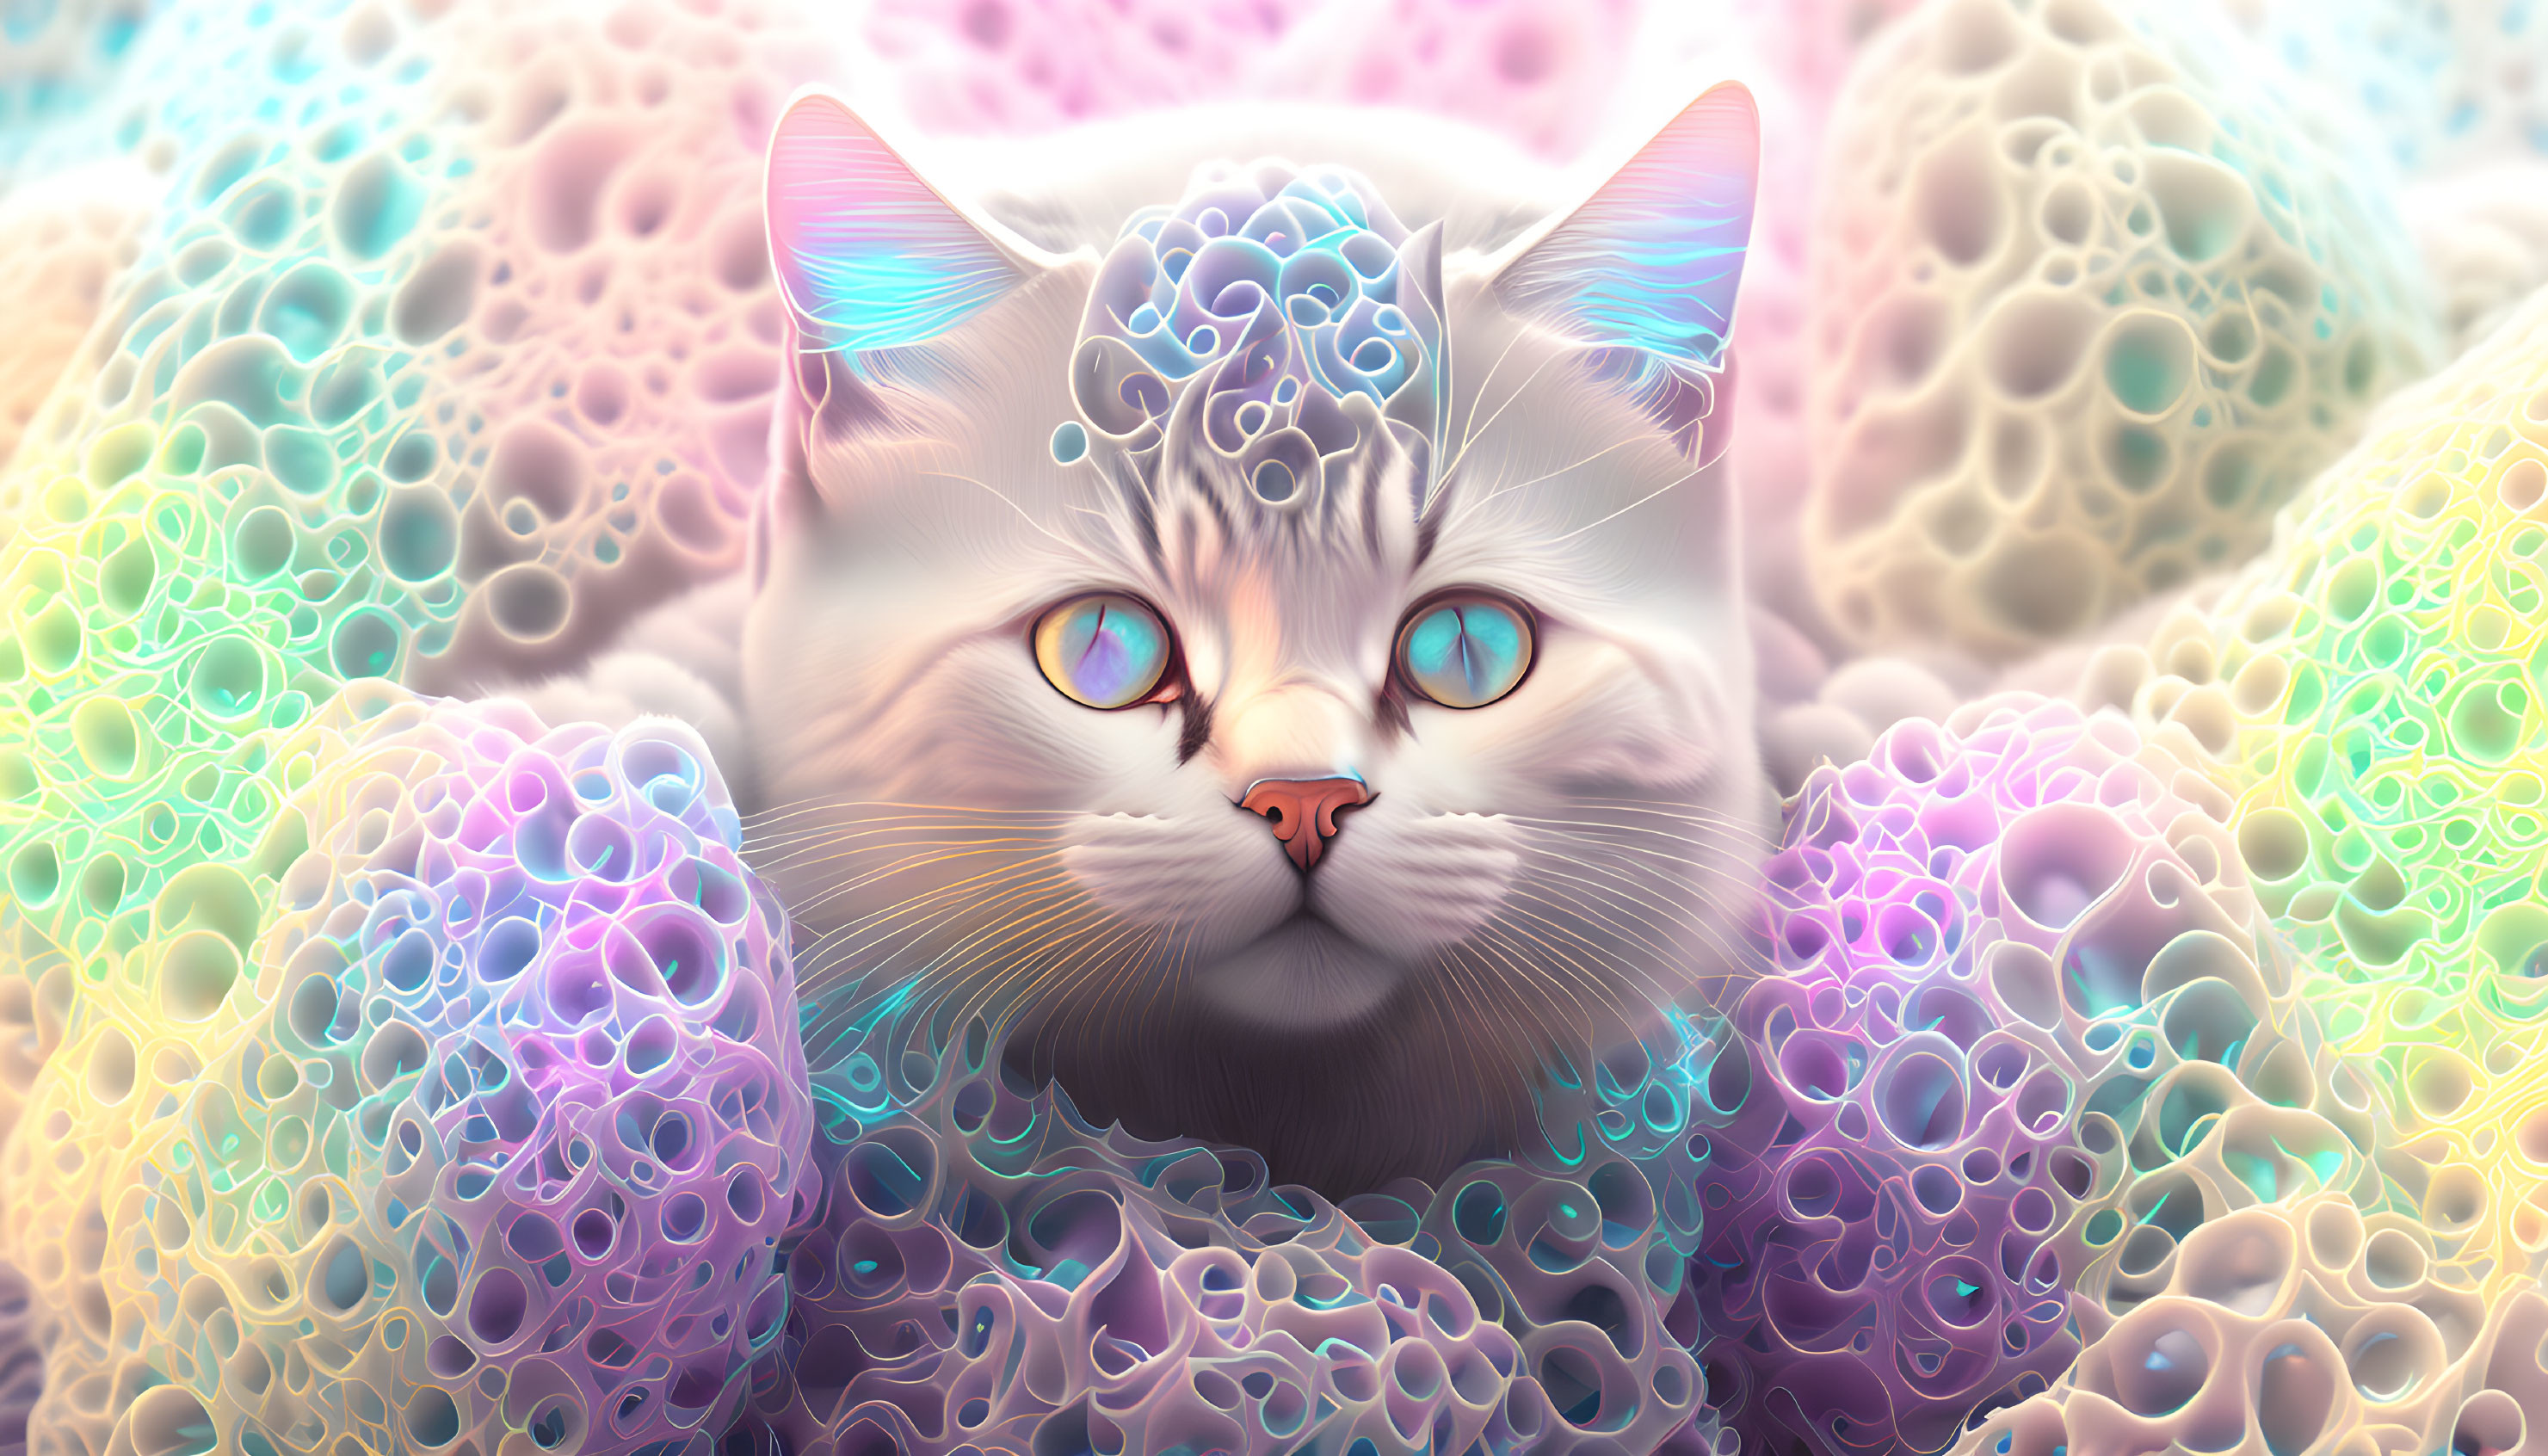 Colorful Stylized Cat Art with Intricate Patterns and Bubbles